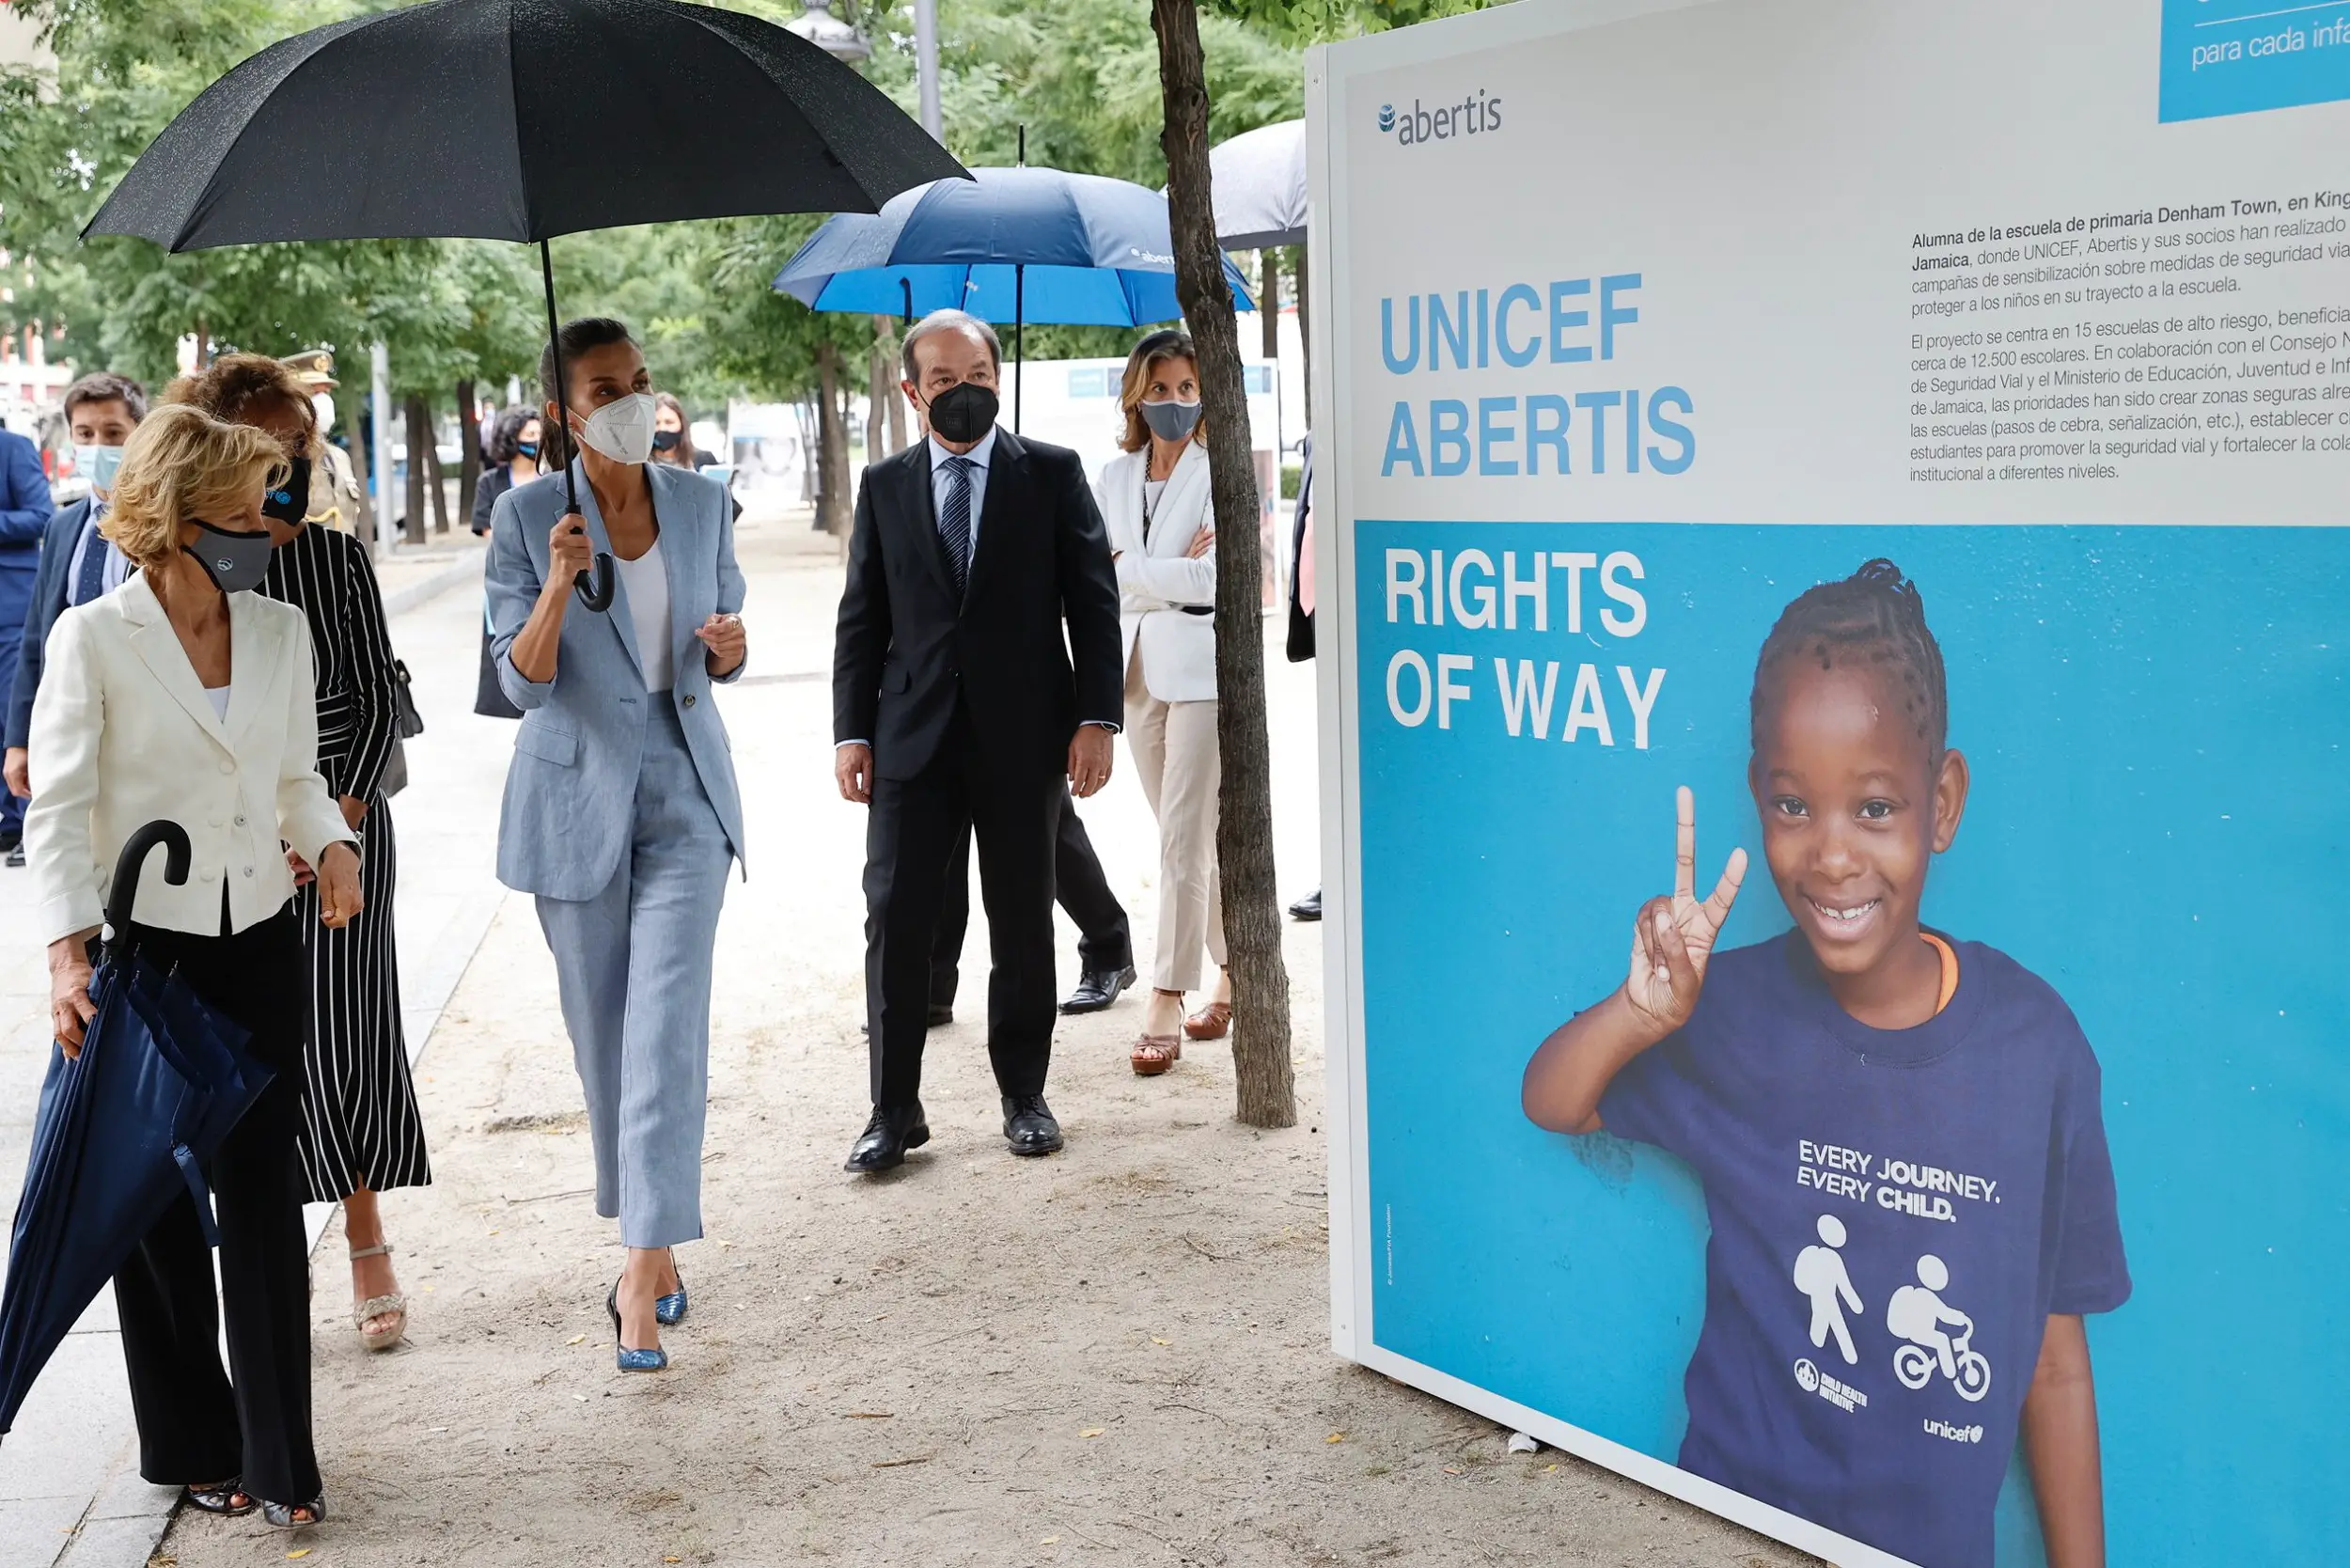 Queen Letizia of Spain, today, presided over a working meeting with members of the management team of Abertis and its Foundation and UNICEF Spain